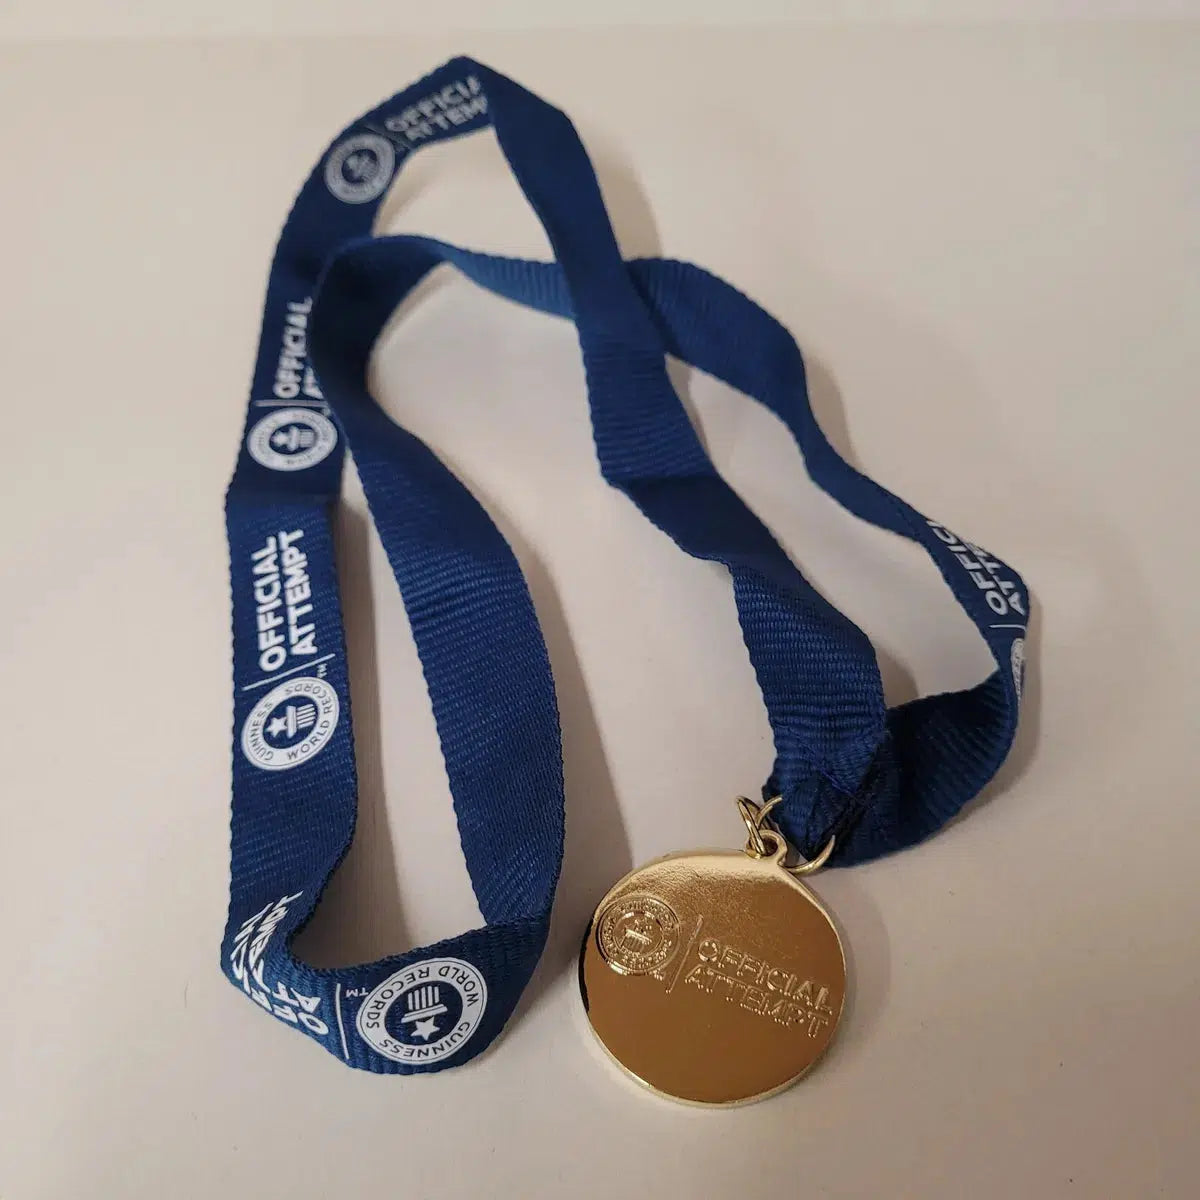 Official Attempt Medallion-Guinness World Records